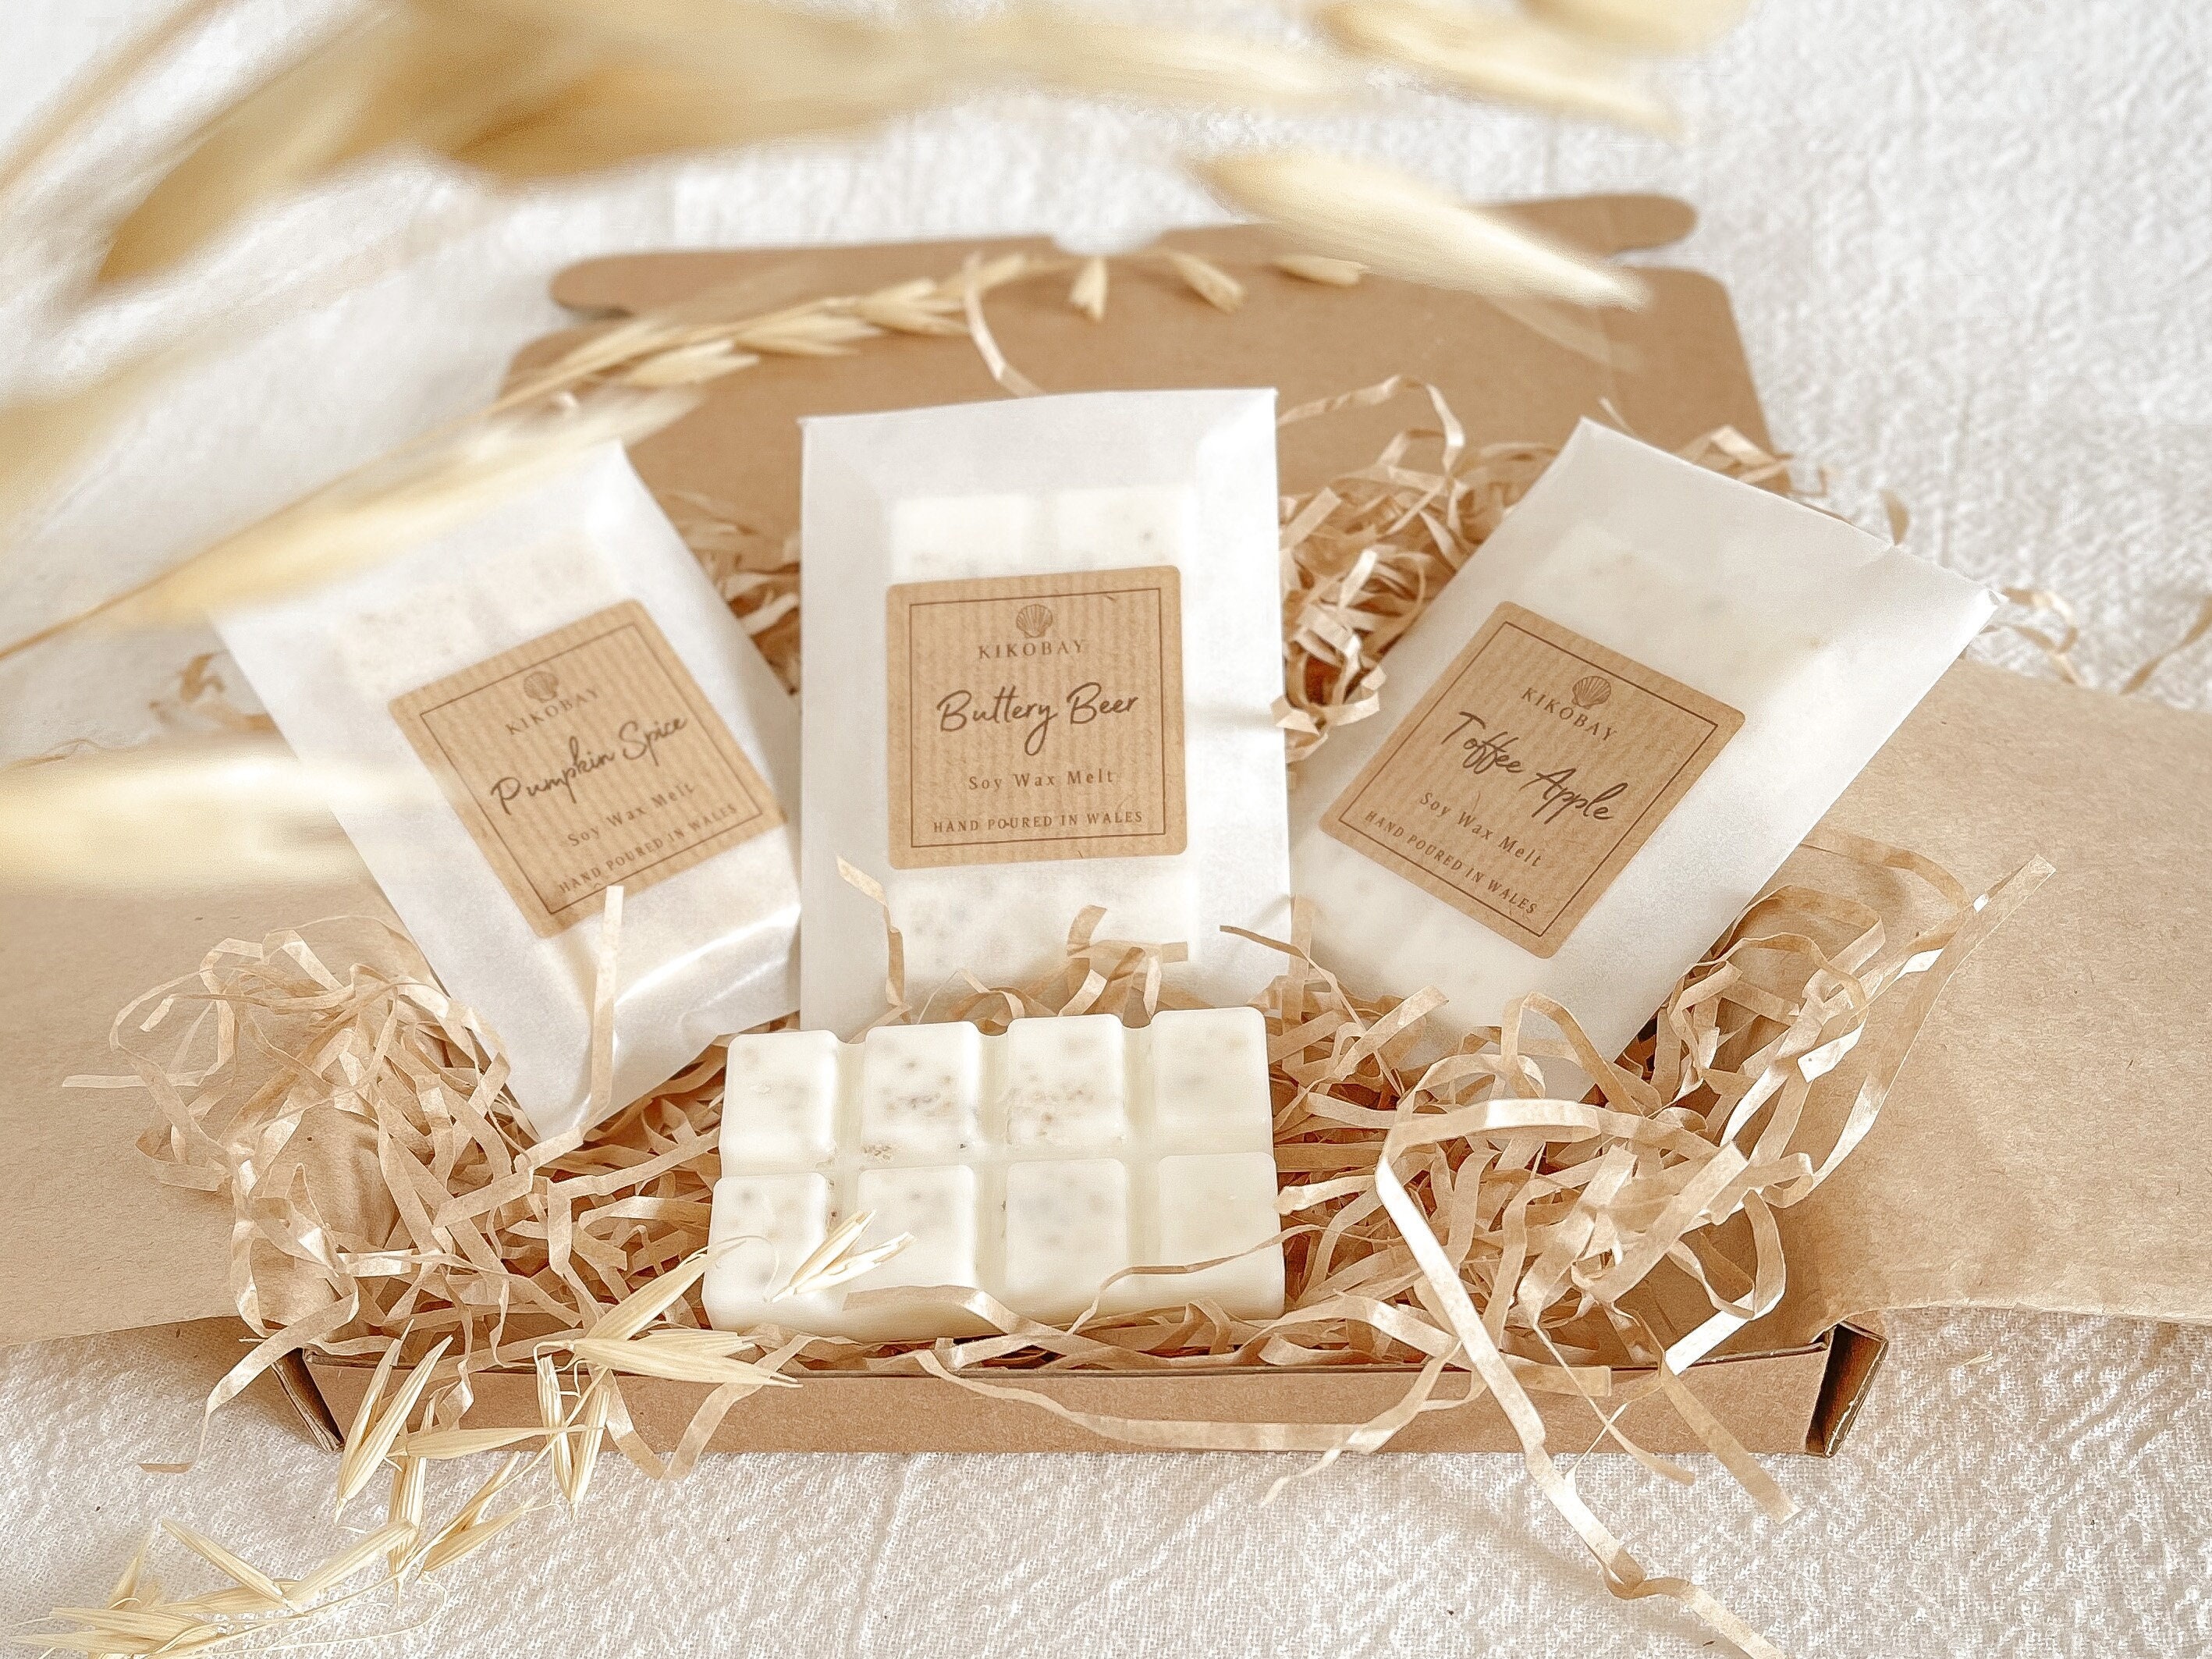 Clean Cotton Soy Wax Melts Wax Melts for Warmer, Scented Wax Melts, Pet  Safe Wax Melts, Strong Wax Melts, Natural Wax Melts, Best Wax Melts 